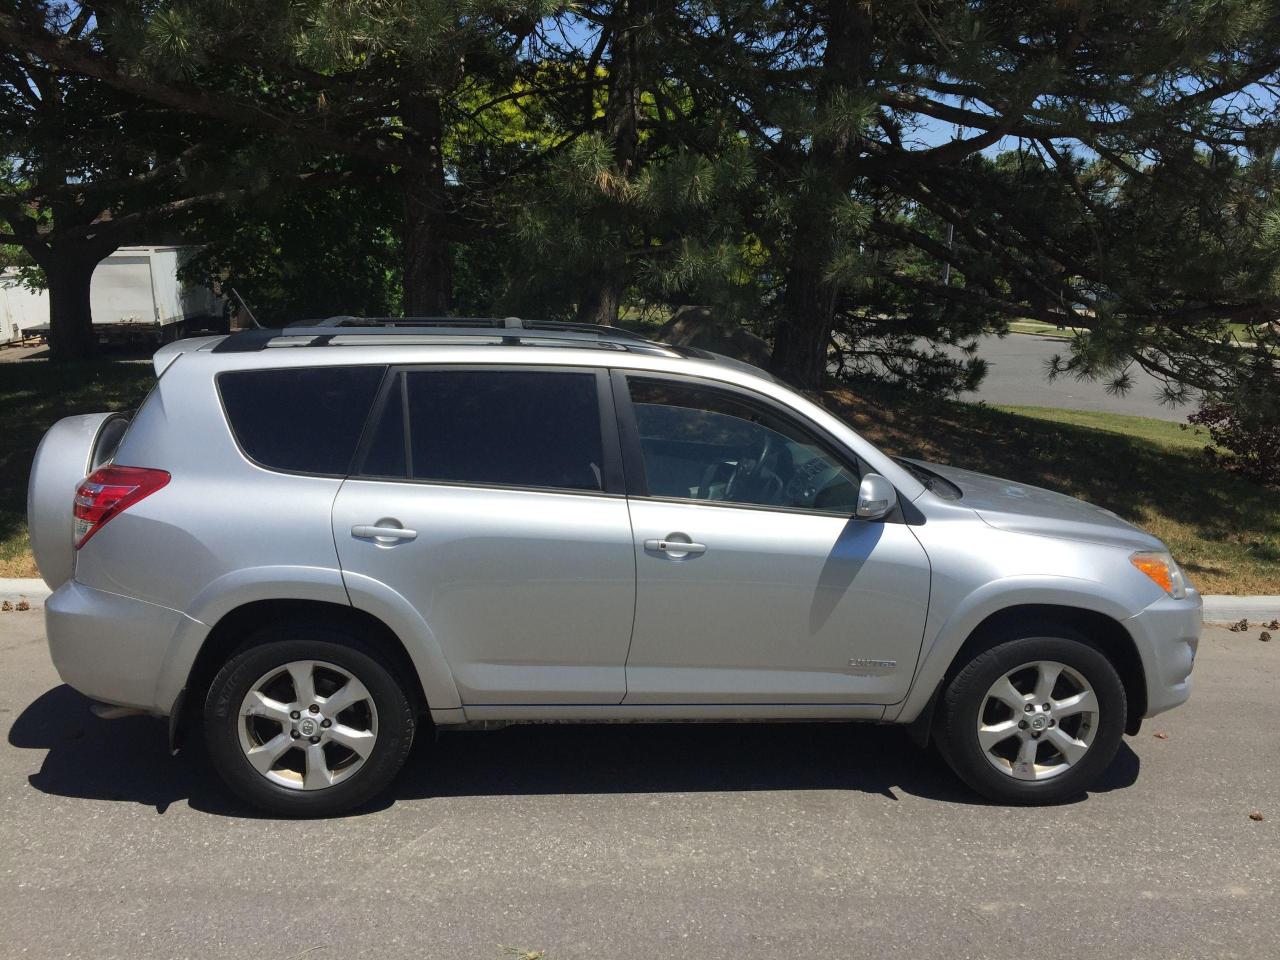 2009 Toyota RAV4 LIMITED - 1 LOCAL OWNER! NO CLAIMS! - Photo #1